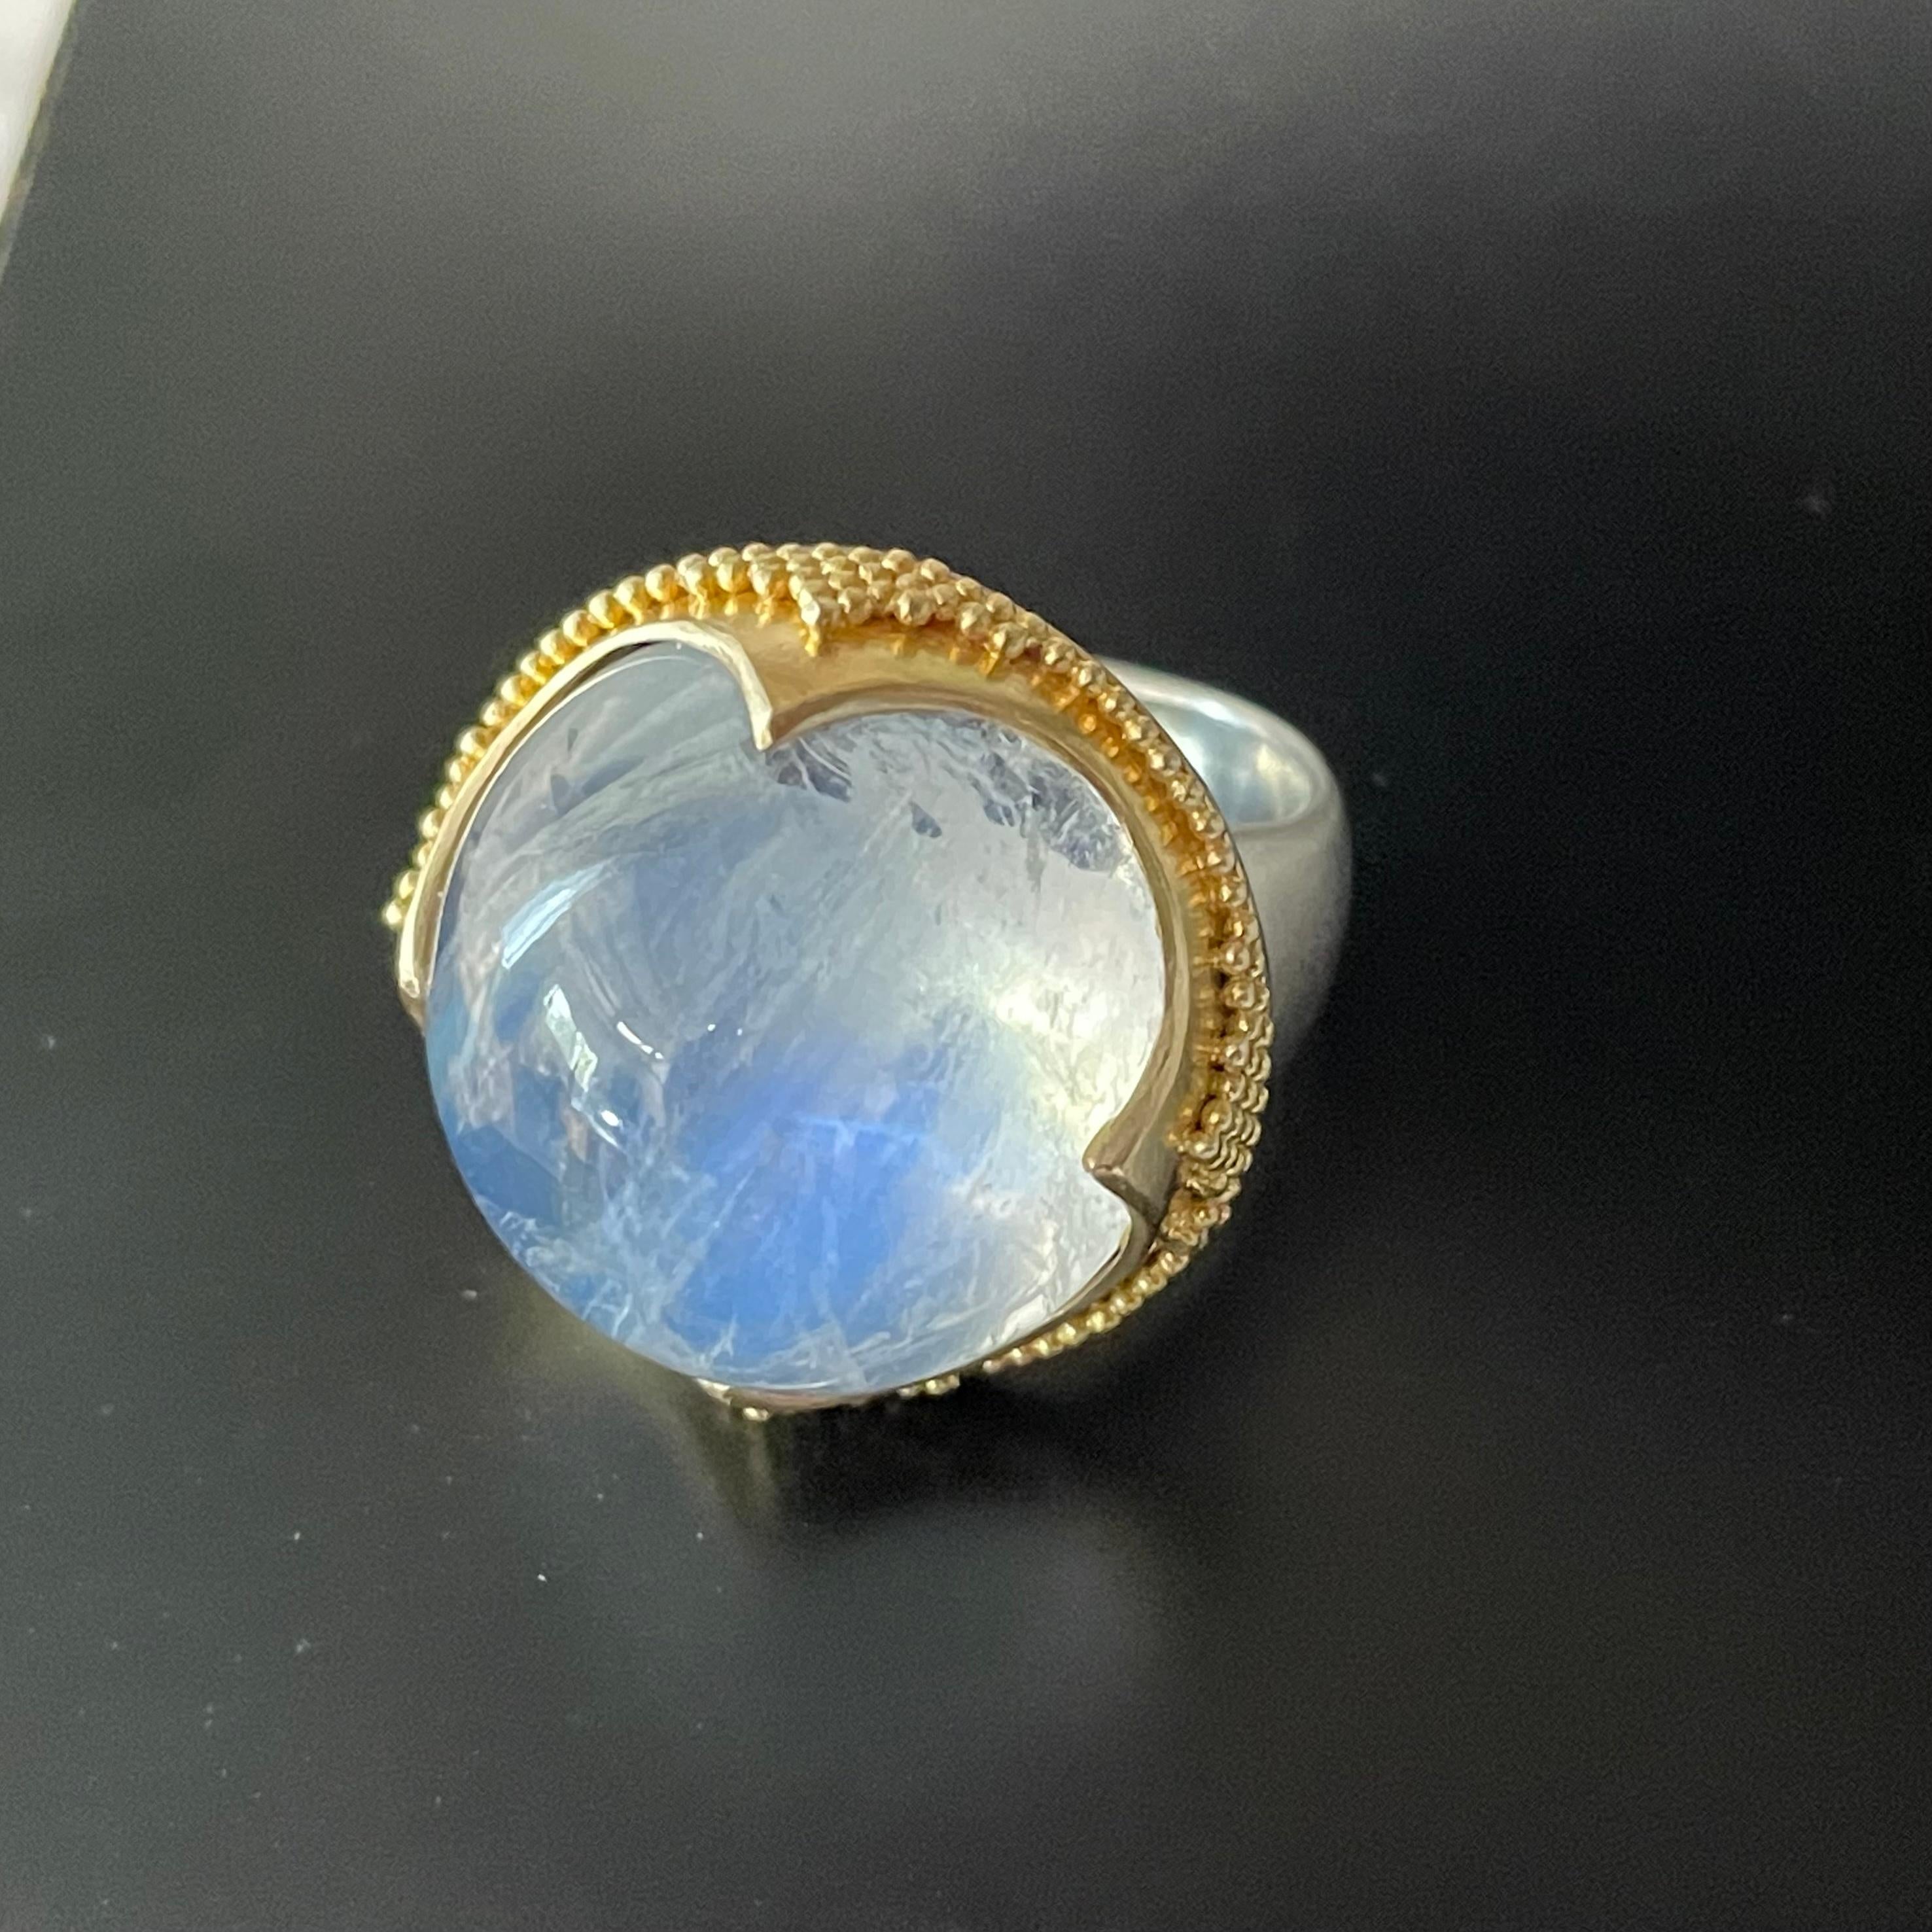 A large 20 mm round cabochon of rainbow moonstone is set in in an ancient inspired 